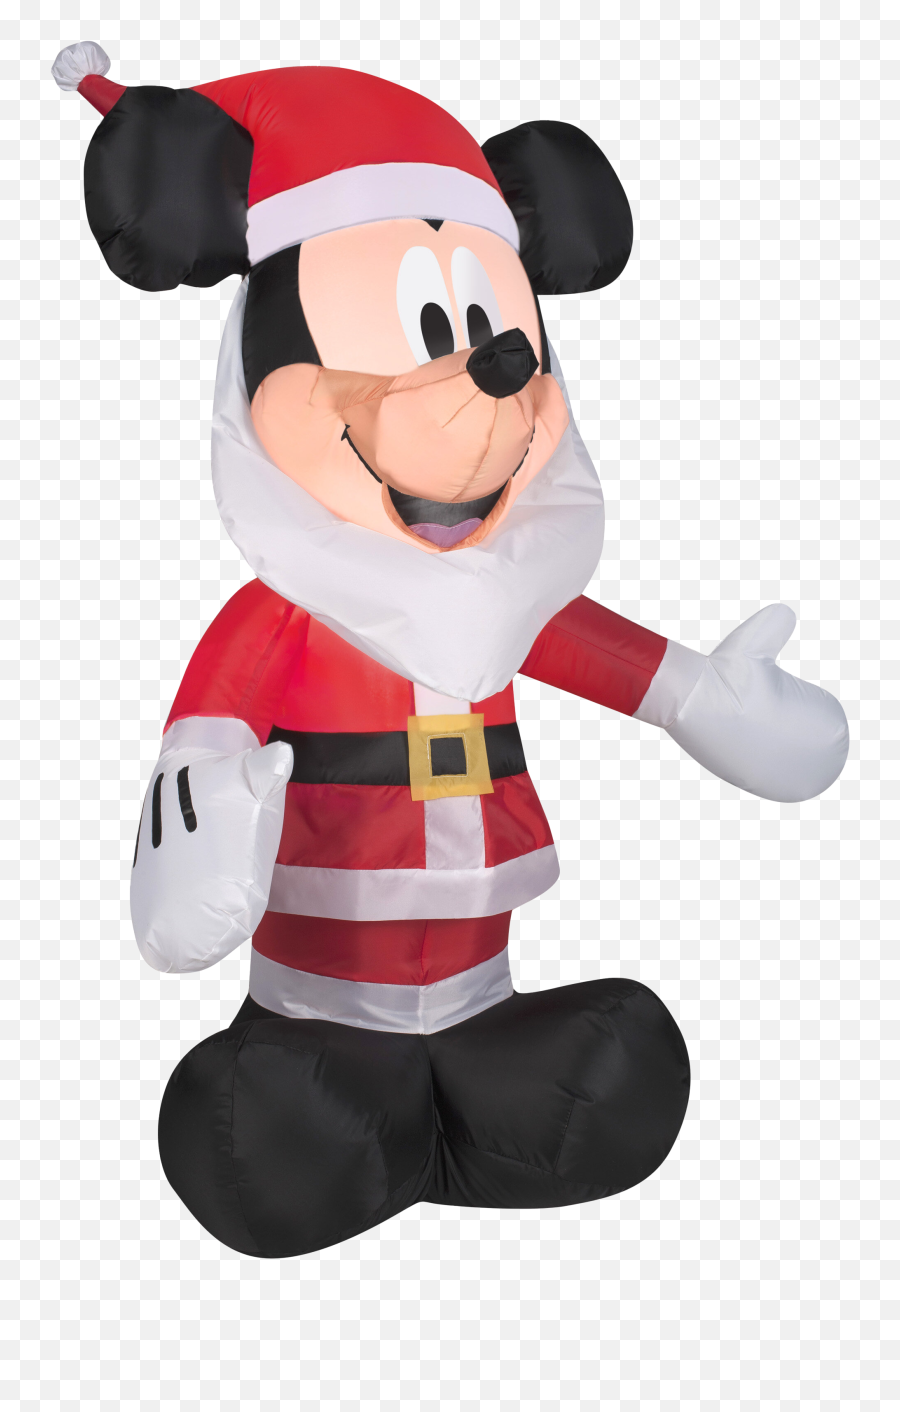 Mickey Mouse Png Transparent Images Free Download Real - 4 Tall Santa Micky,Transparent Mickey Mouse